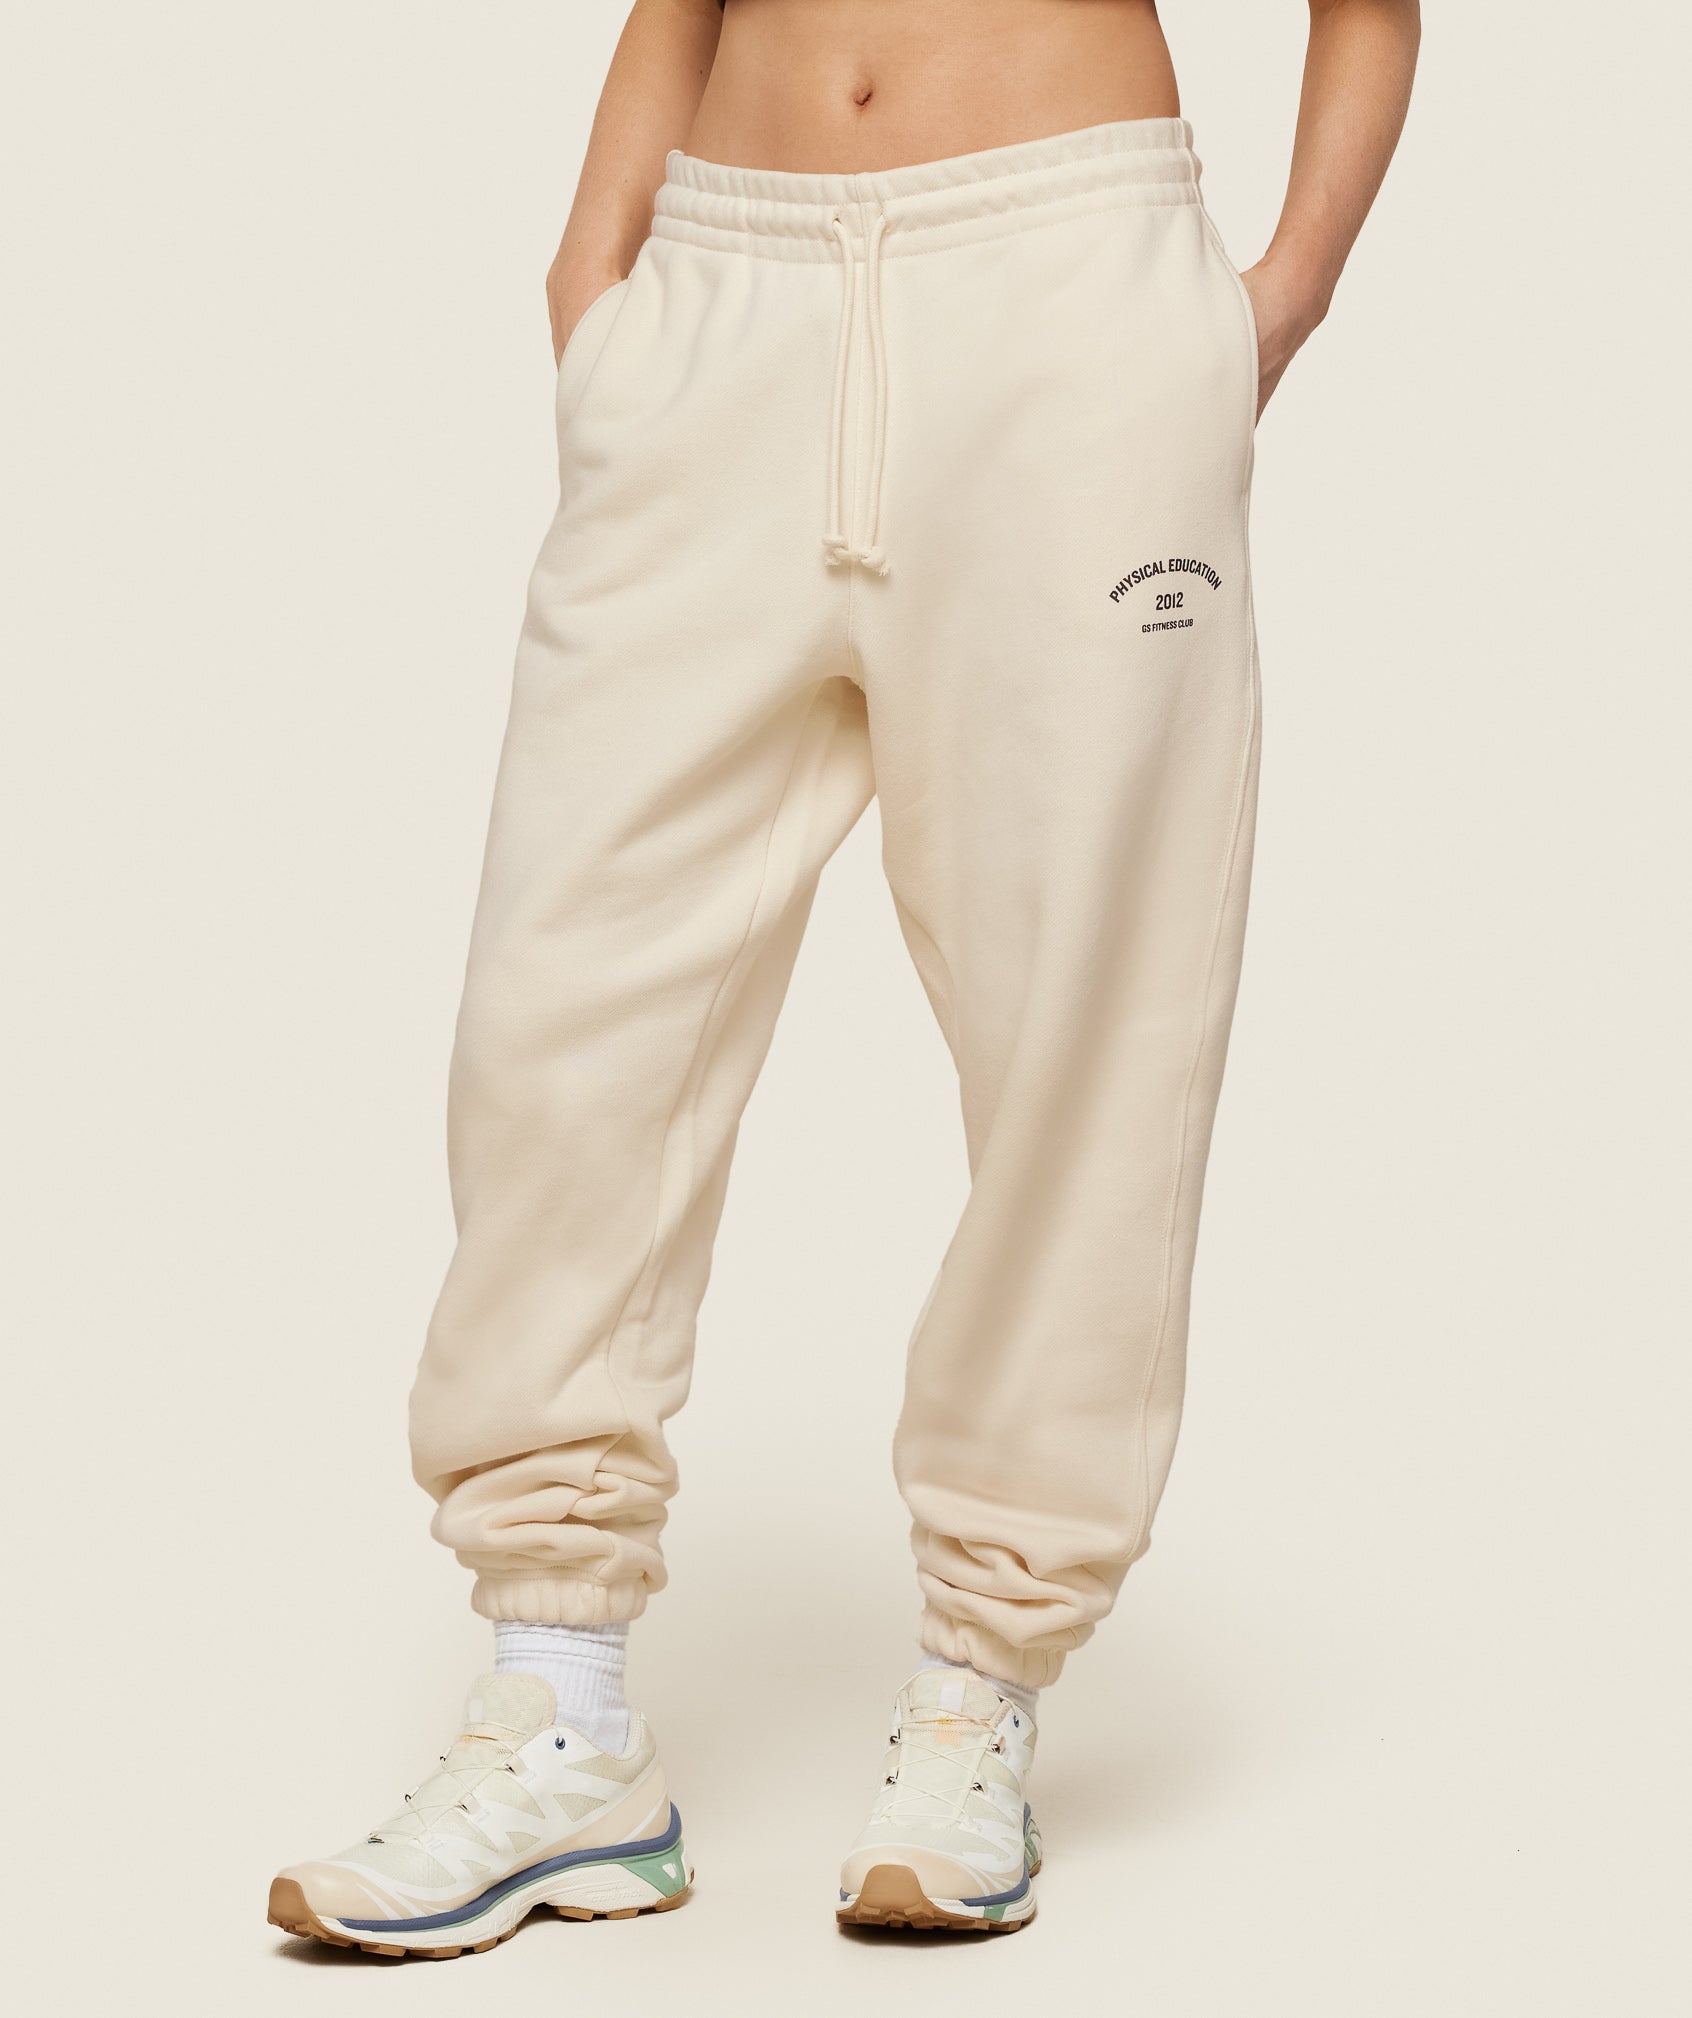 Phys Ed Graphic Sweatpants in Ecru White - view 1